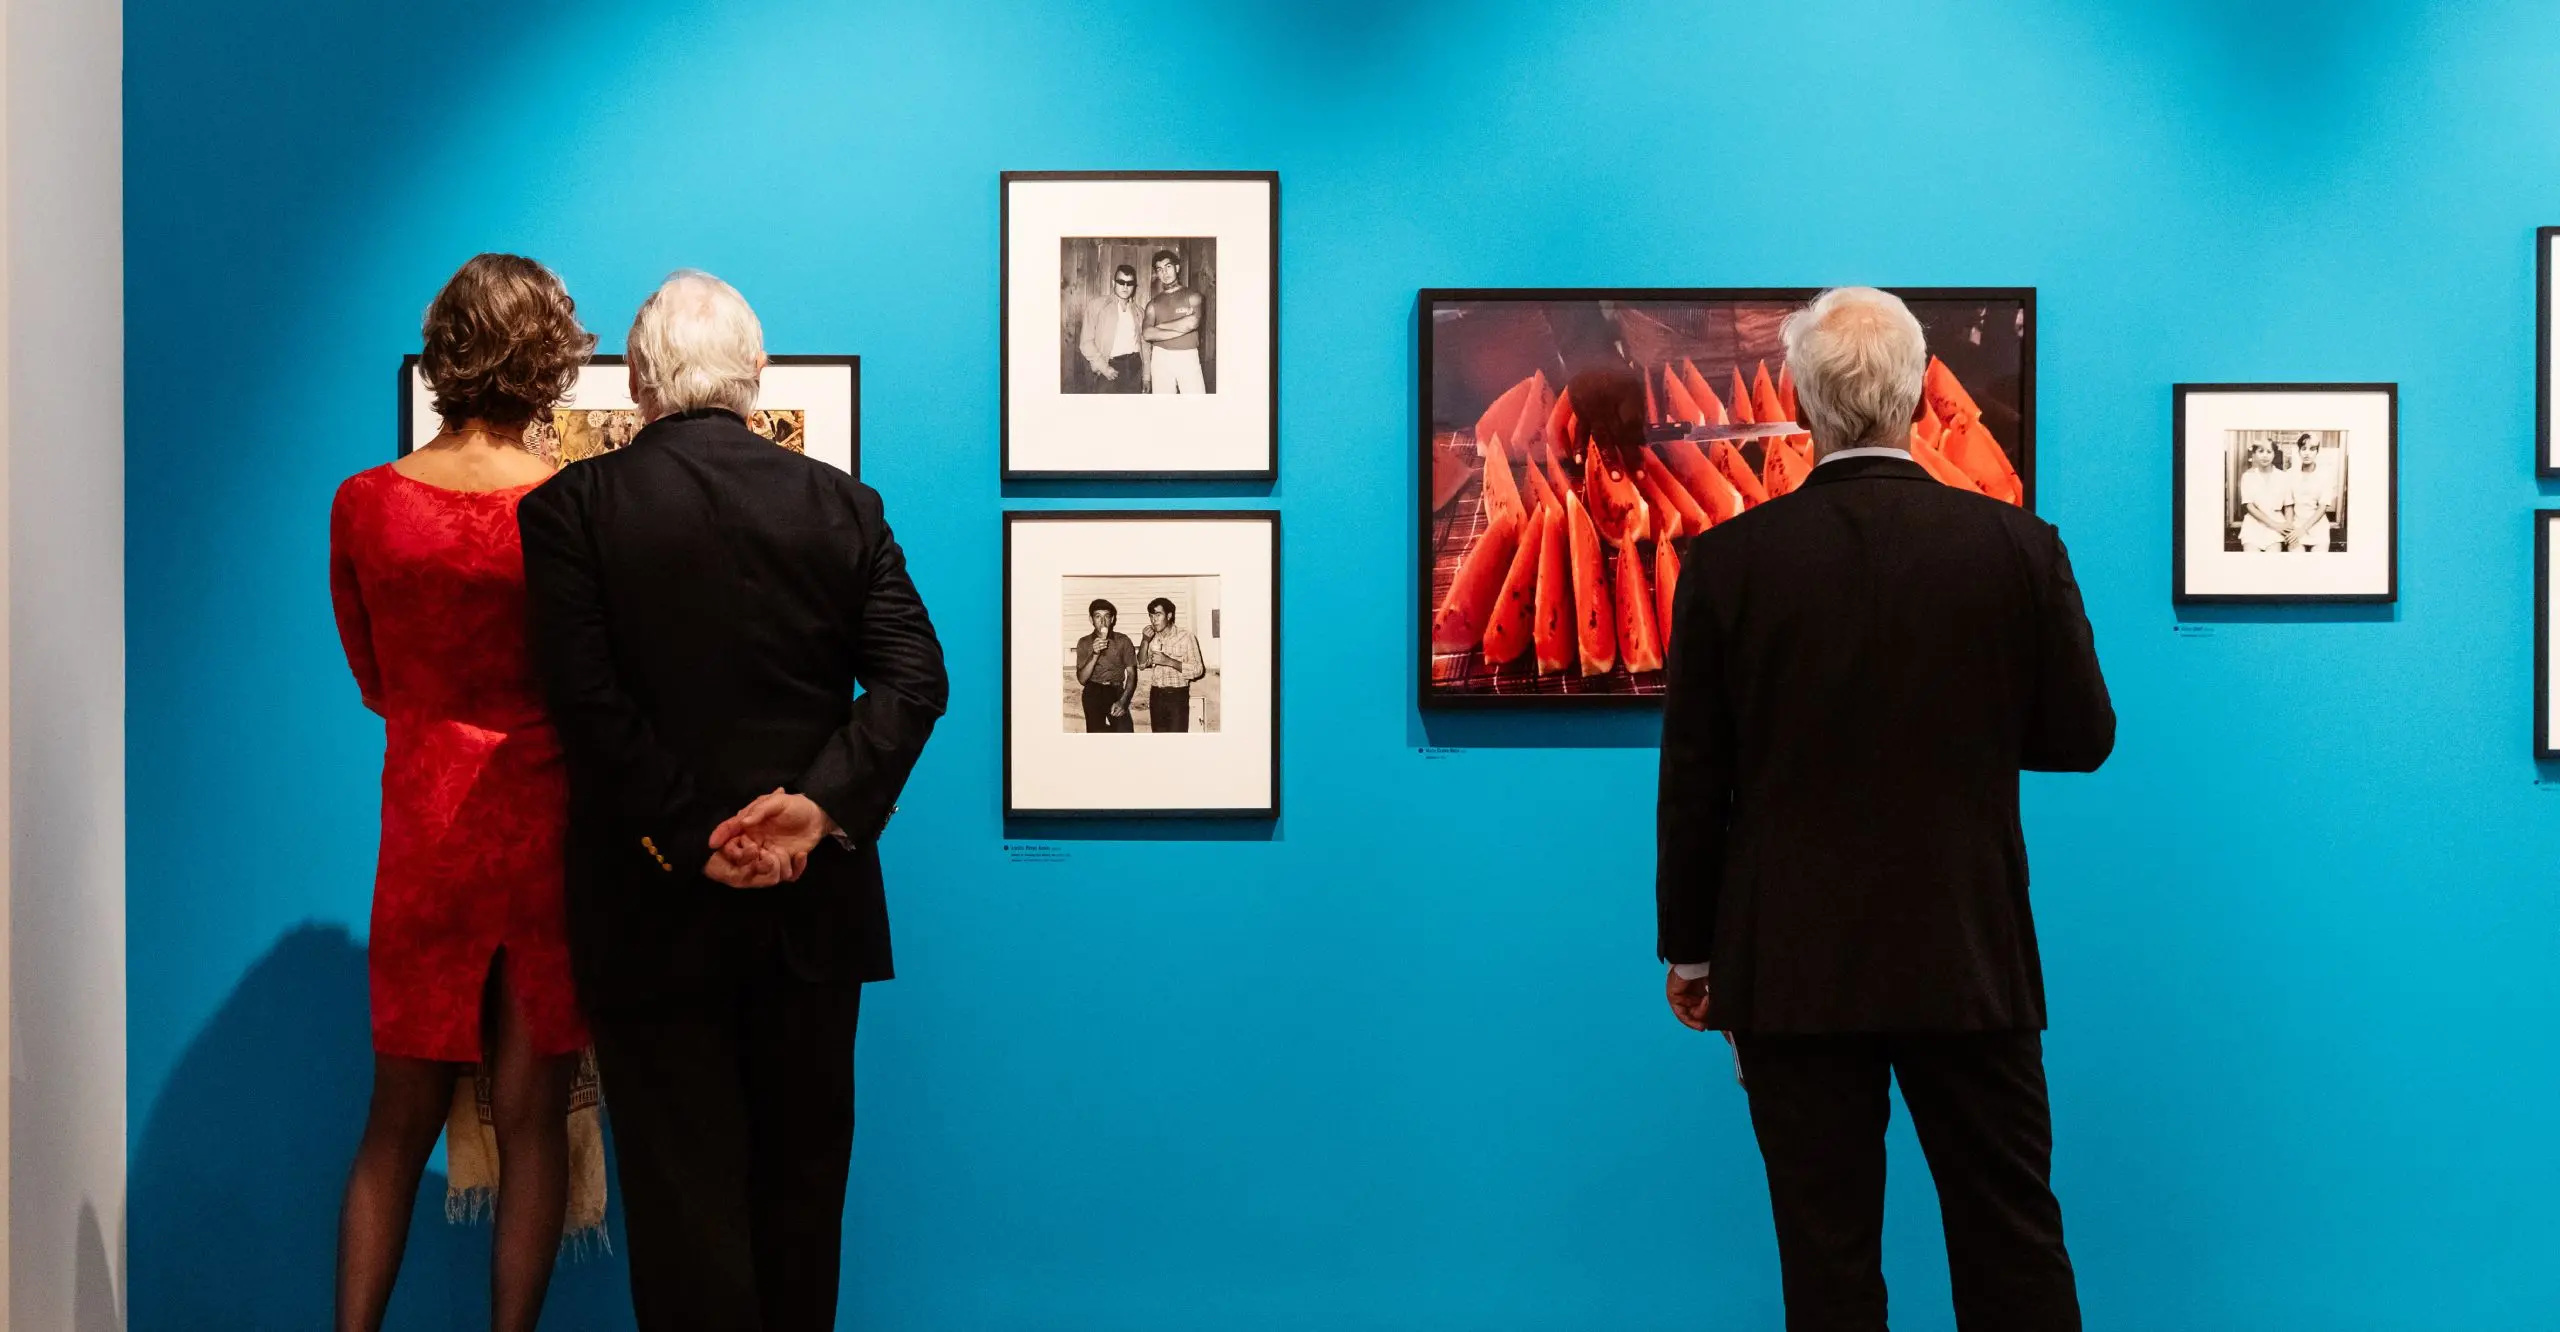 Colour photograph of three people with their backs to the camera, looking at a blue wall with framed photographs